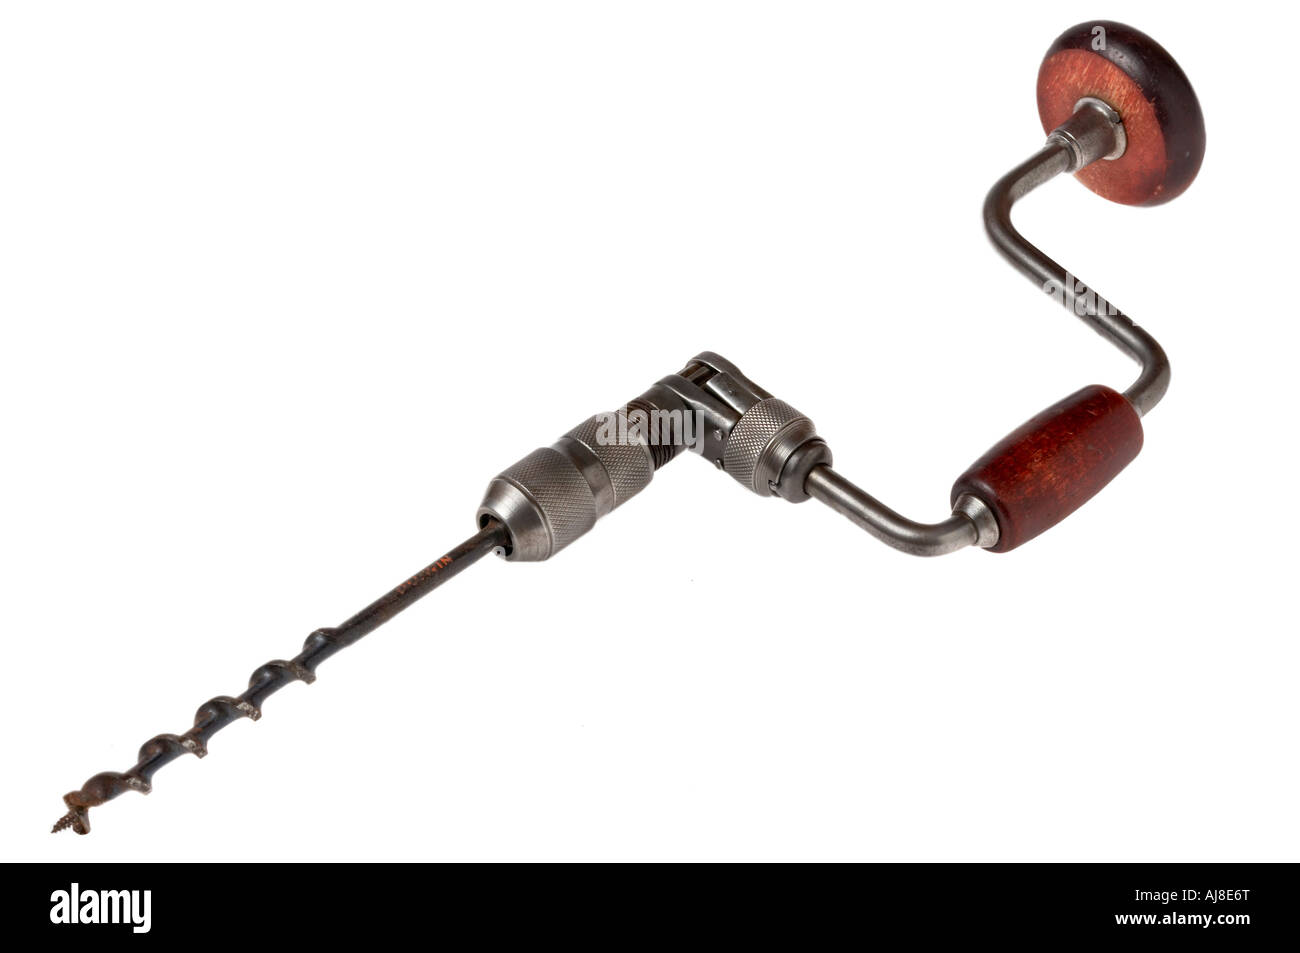 Bit Brace Drill High Resolution Stock Photography and Images - Alamy